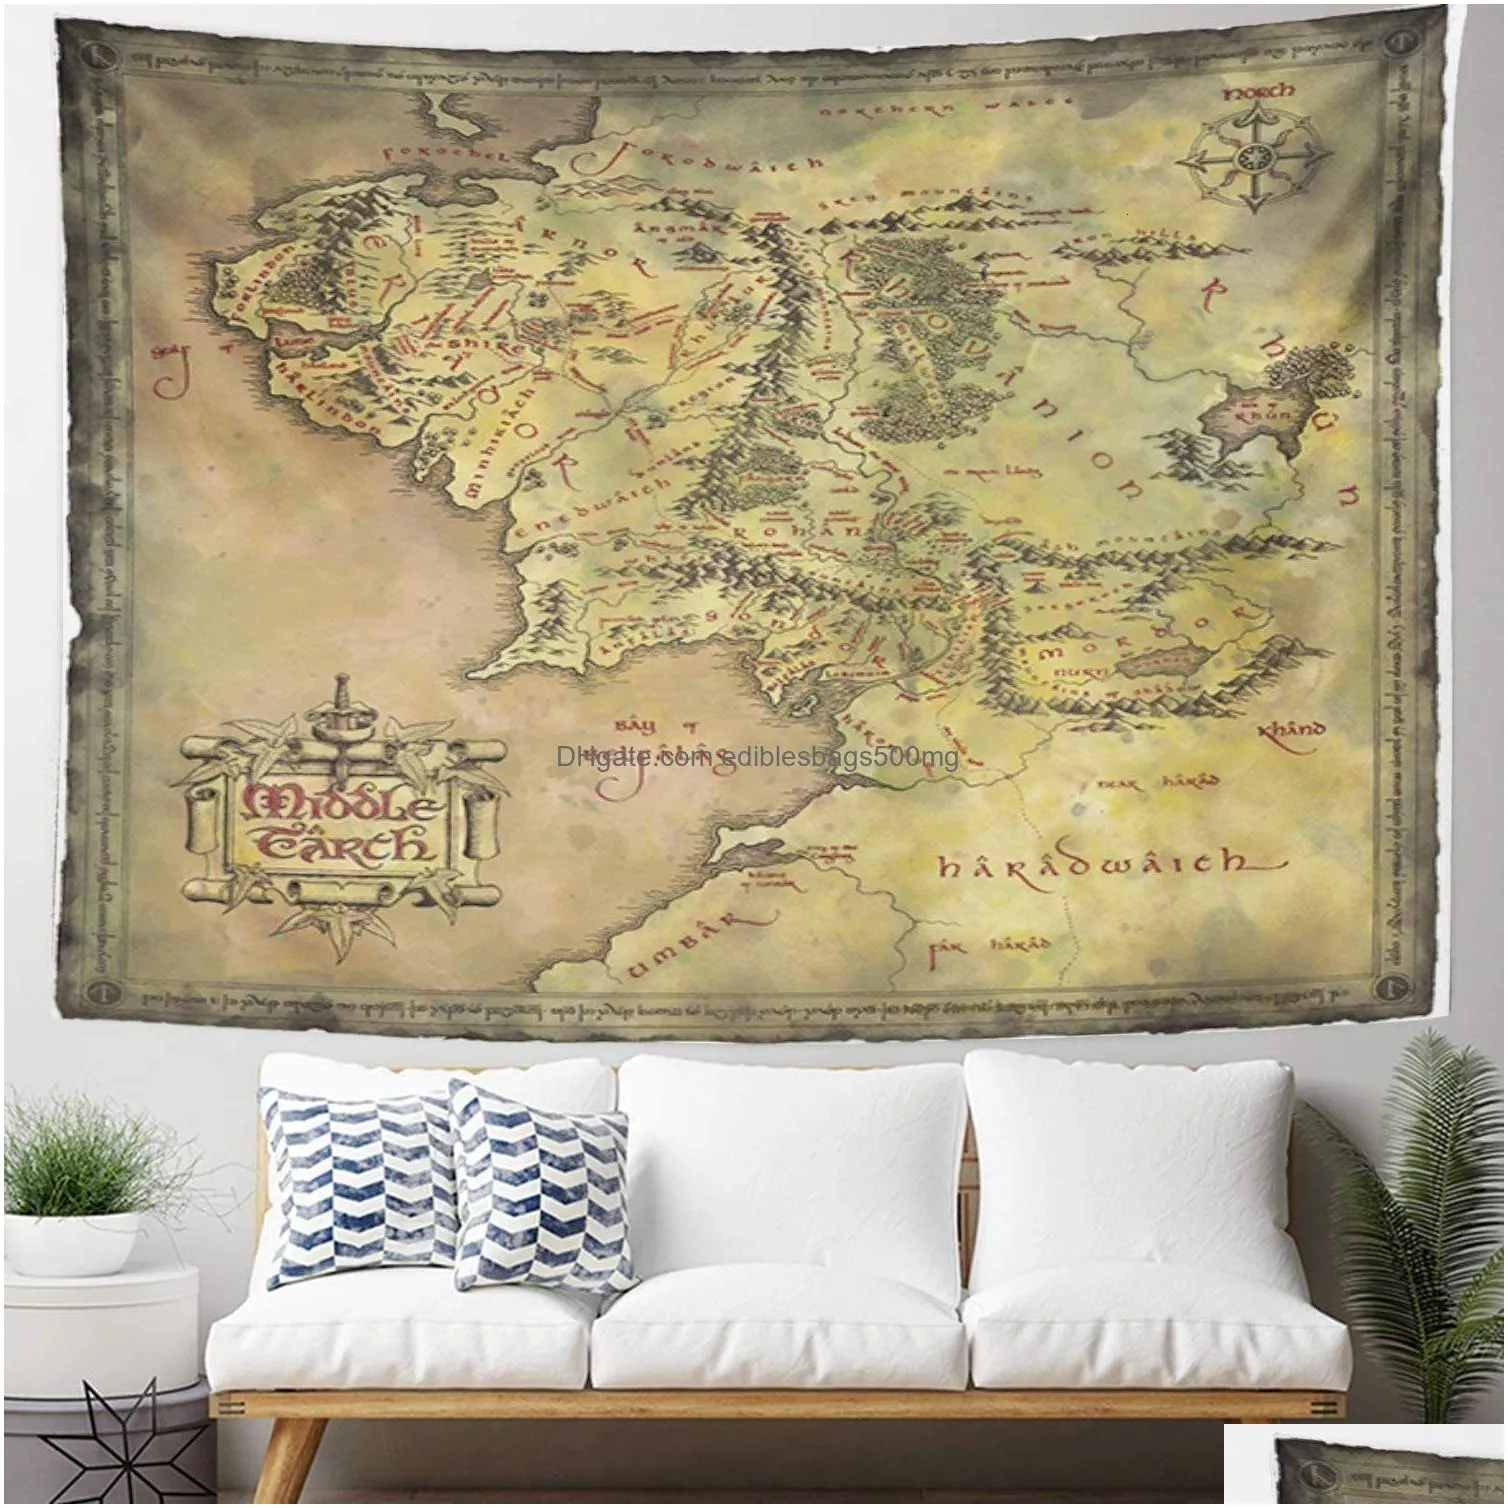 tapestries artwork wall hanging middle earth map 50x60 inches mattress tablecloth curtain home decor print decoration mural 230531